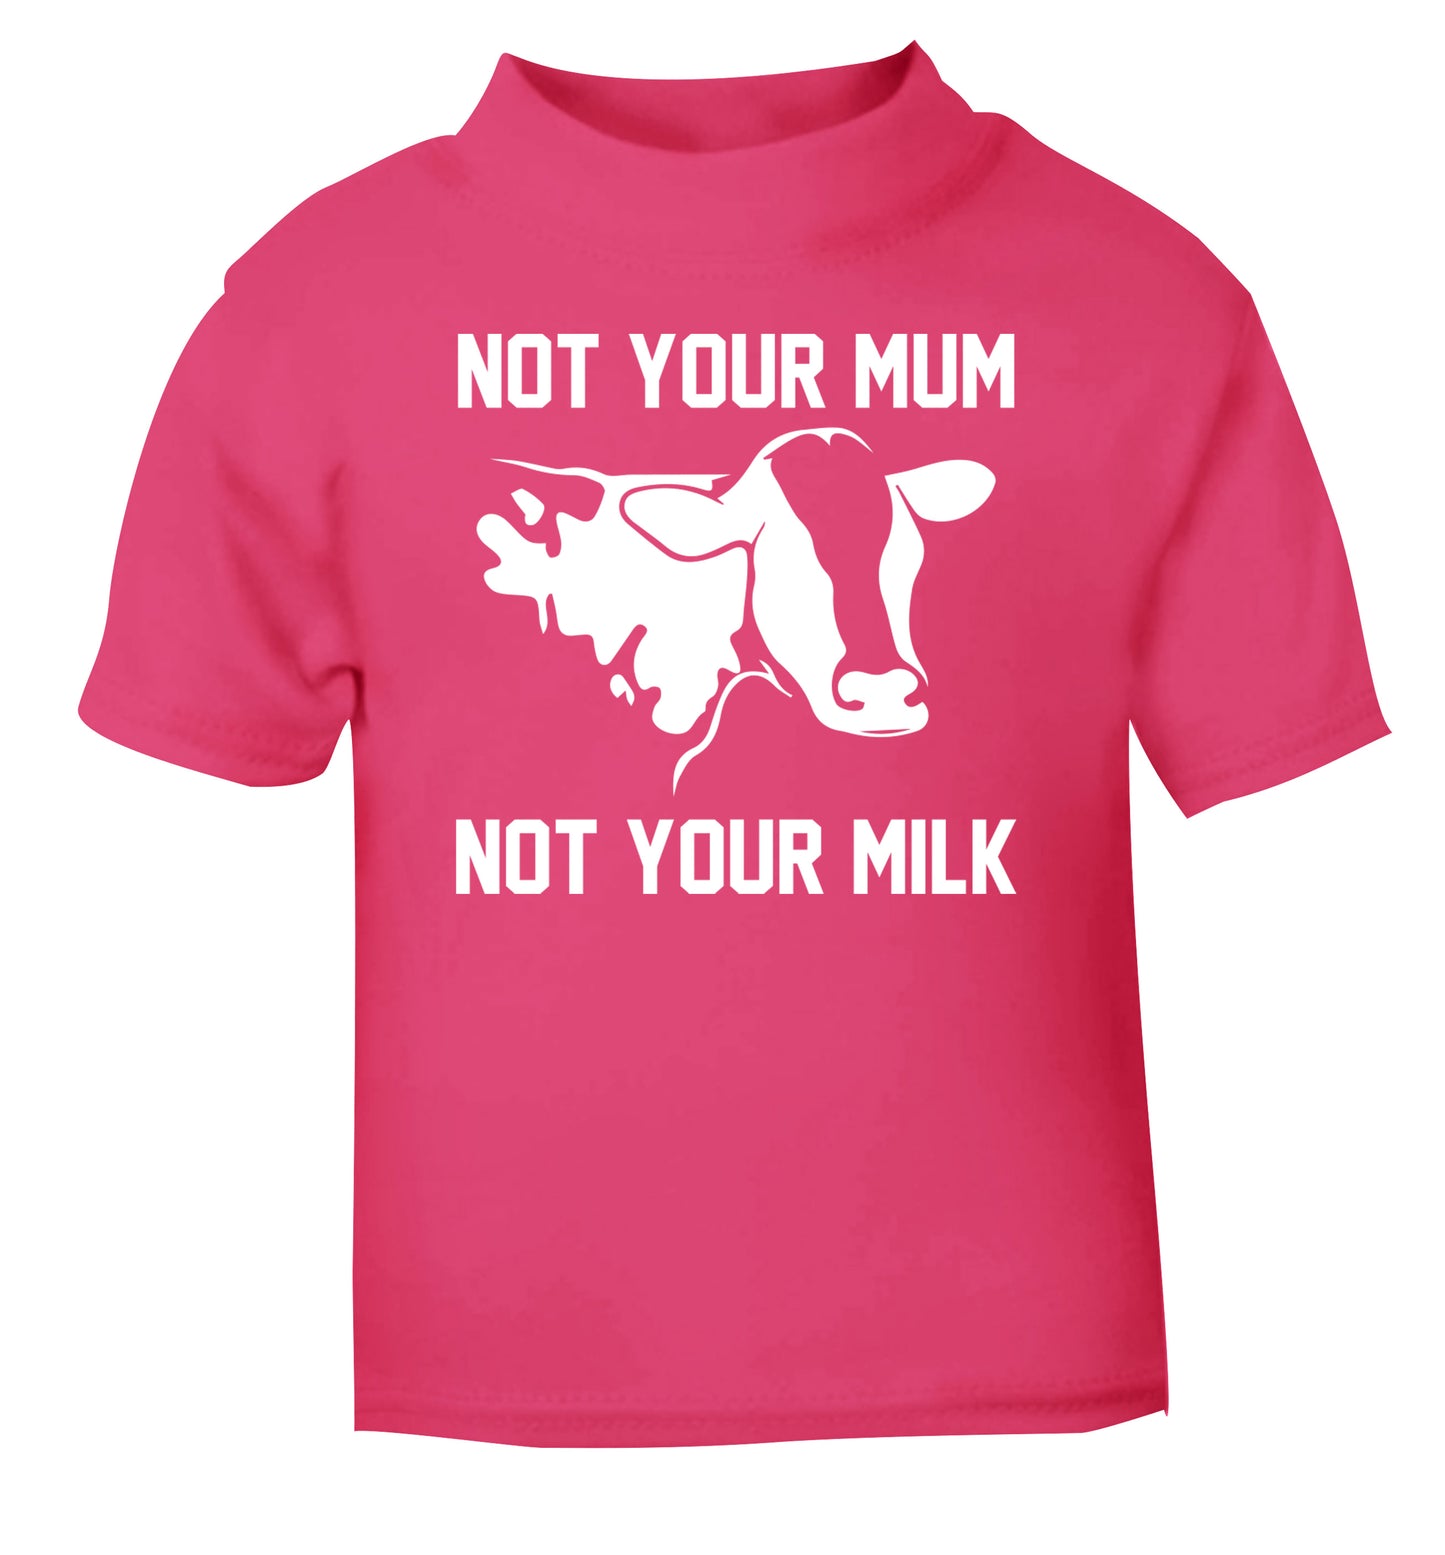 Not your mum not your milk pink Baby Toddler Tshirt 2 Years